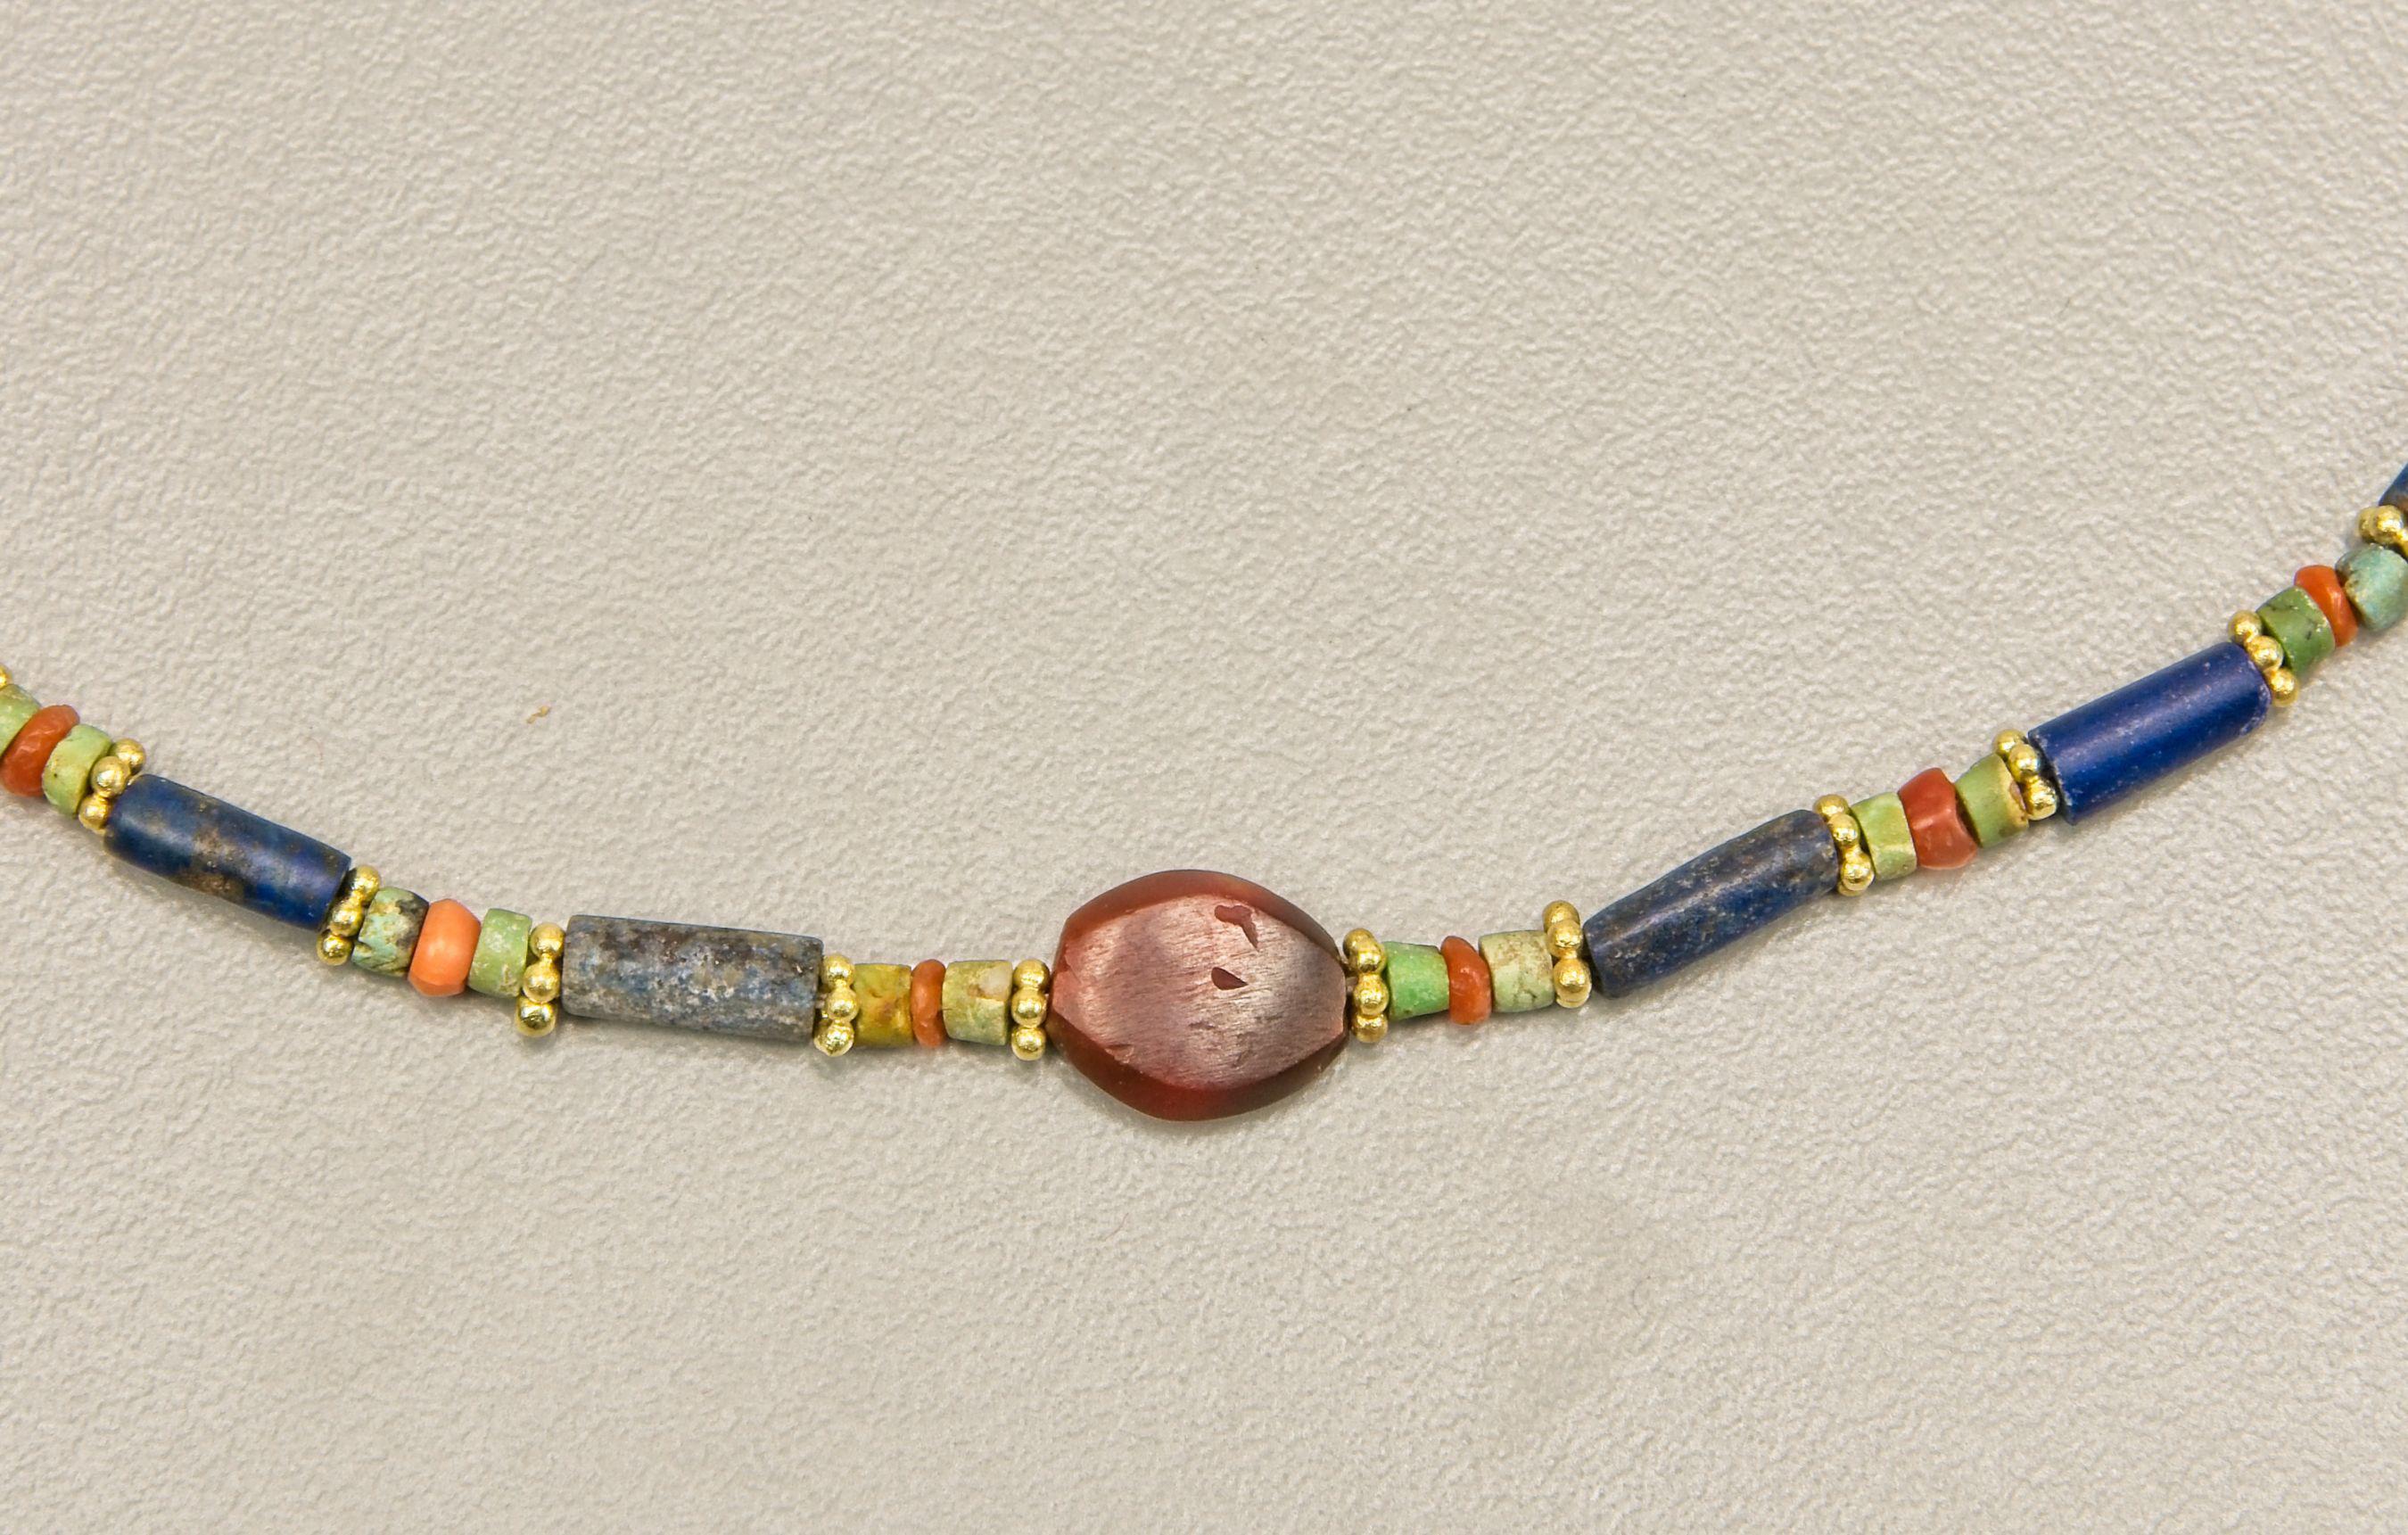 Lapis lazuli cylinder beads alternating with carnelian and turquoise disc beads and faced with granulated 20k gold ring beads. The necklace features a tabular carnelian bead in the center. This bead is 1 cm in length, 9 mm in width at the center and